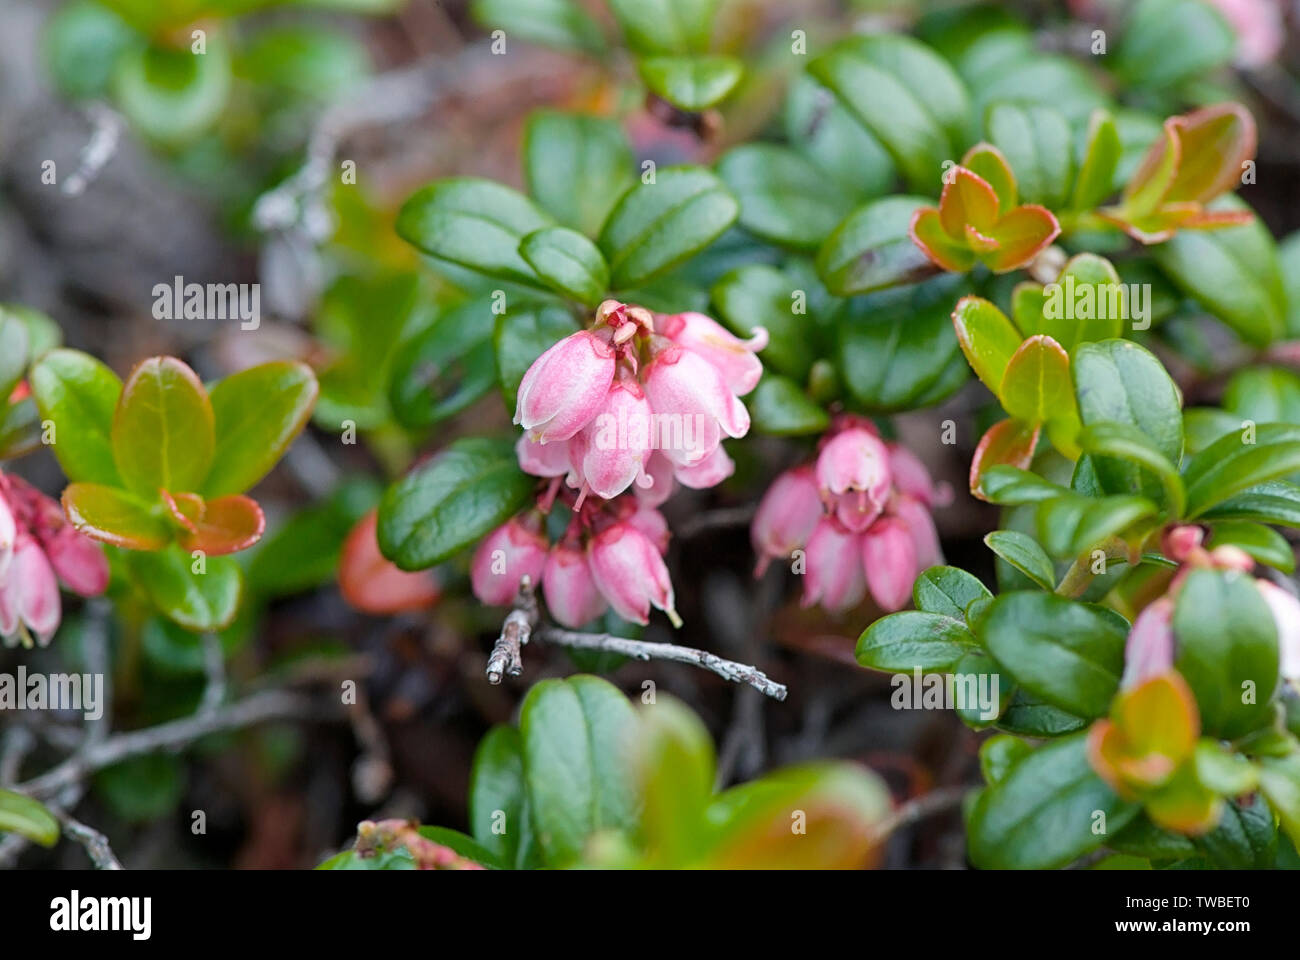 Mountain Cranberry - Vaccinium vitis-idaea - on the side of Alpine Garden Trail in the Presidential Range in the White Mountains, New Hampshire during Stock Photo